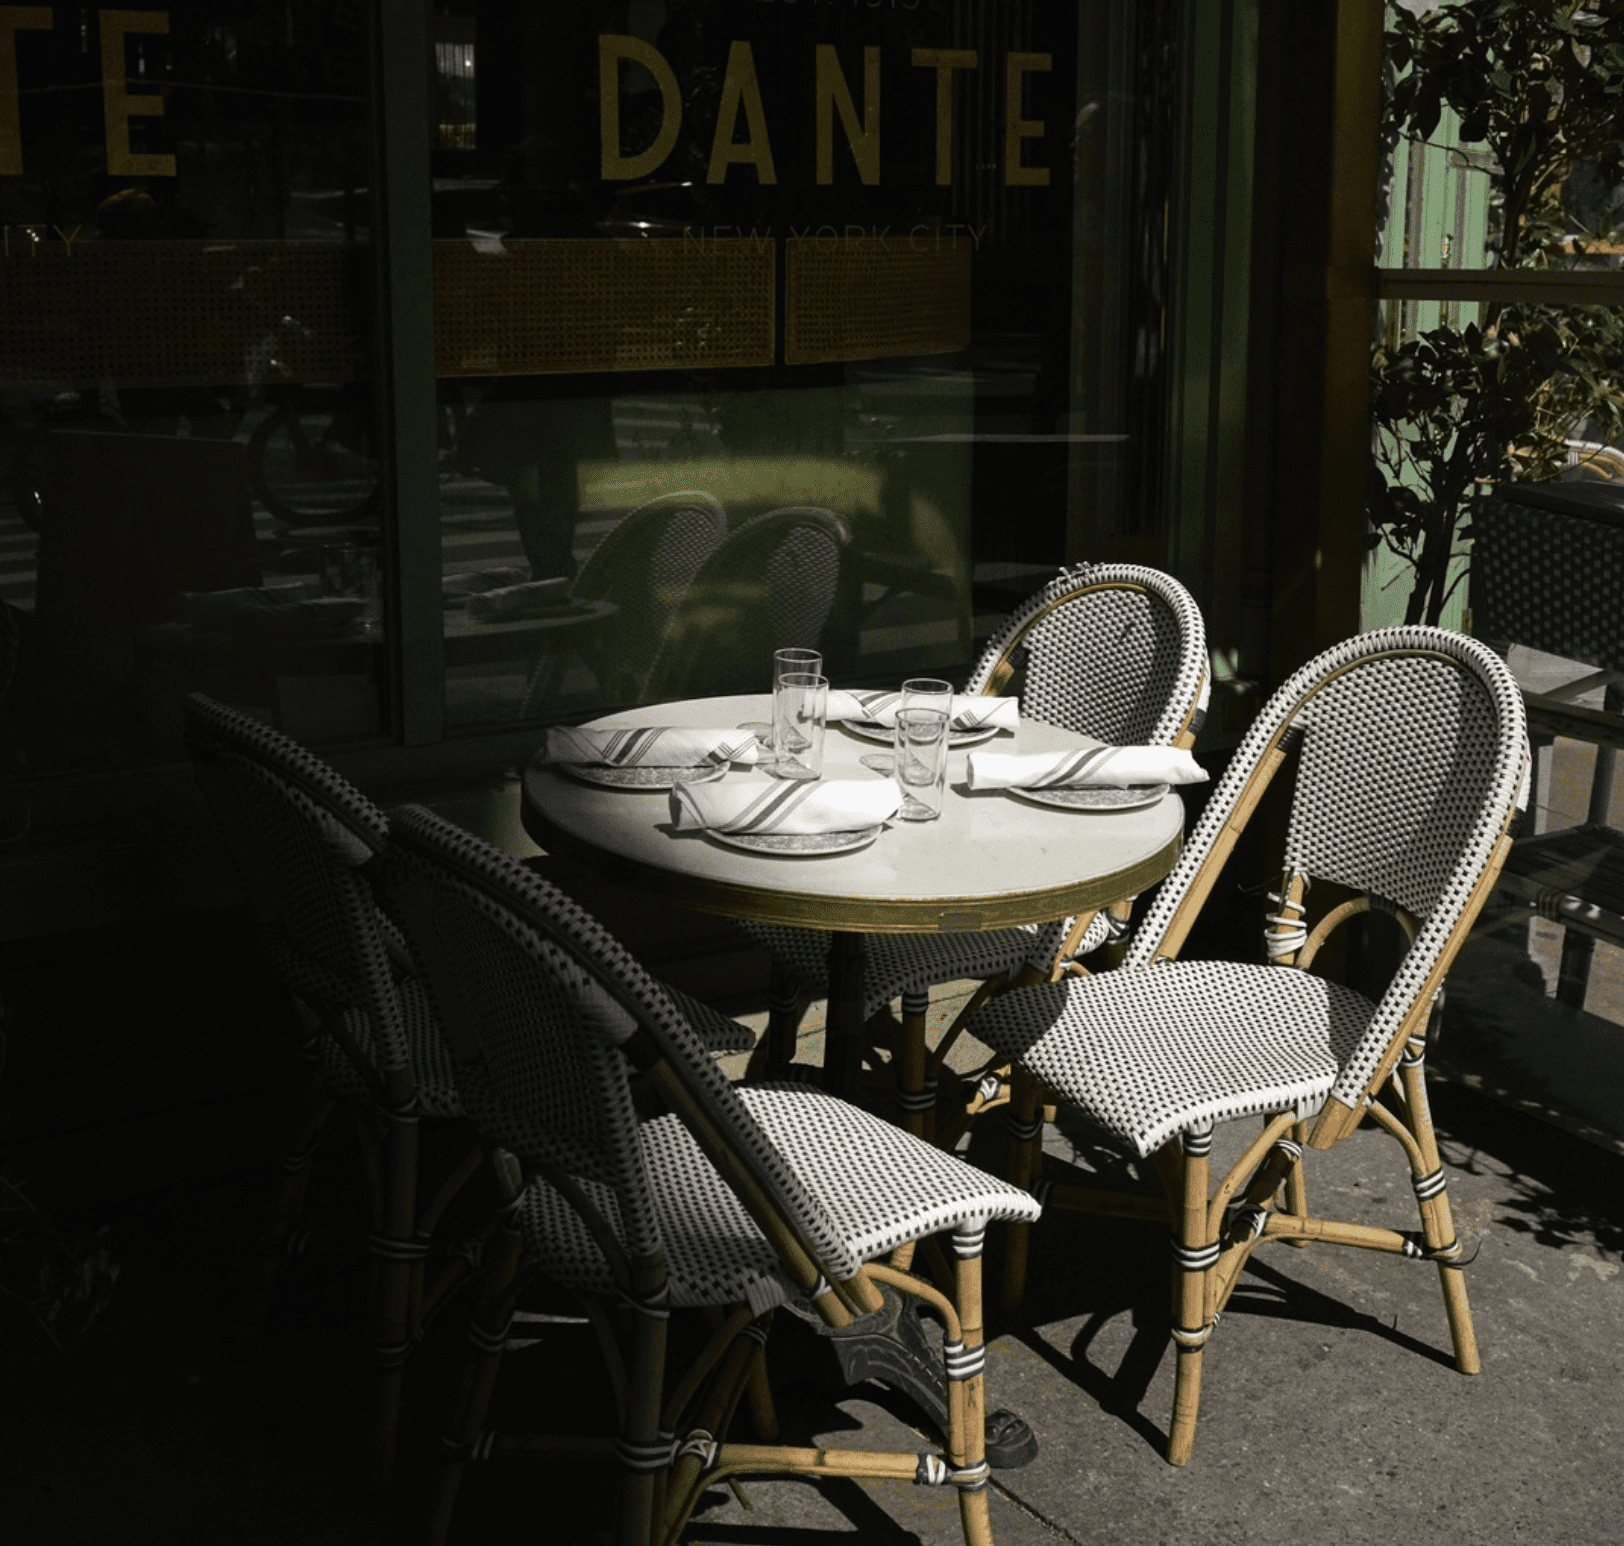 The best outdoor bars and restaurants in New York City | Bistro chairs outside Dante West Village